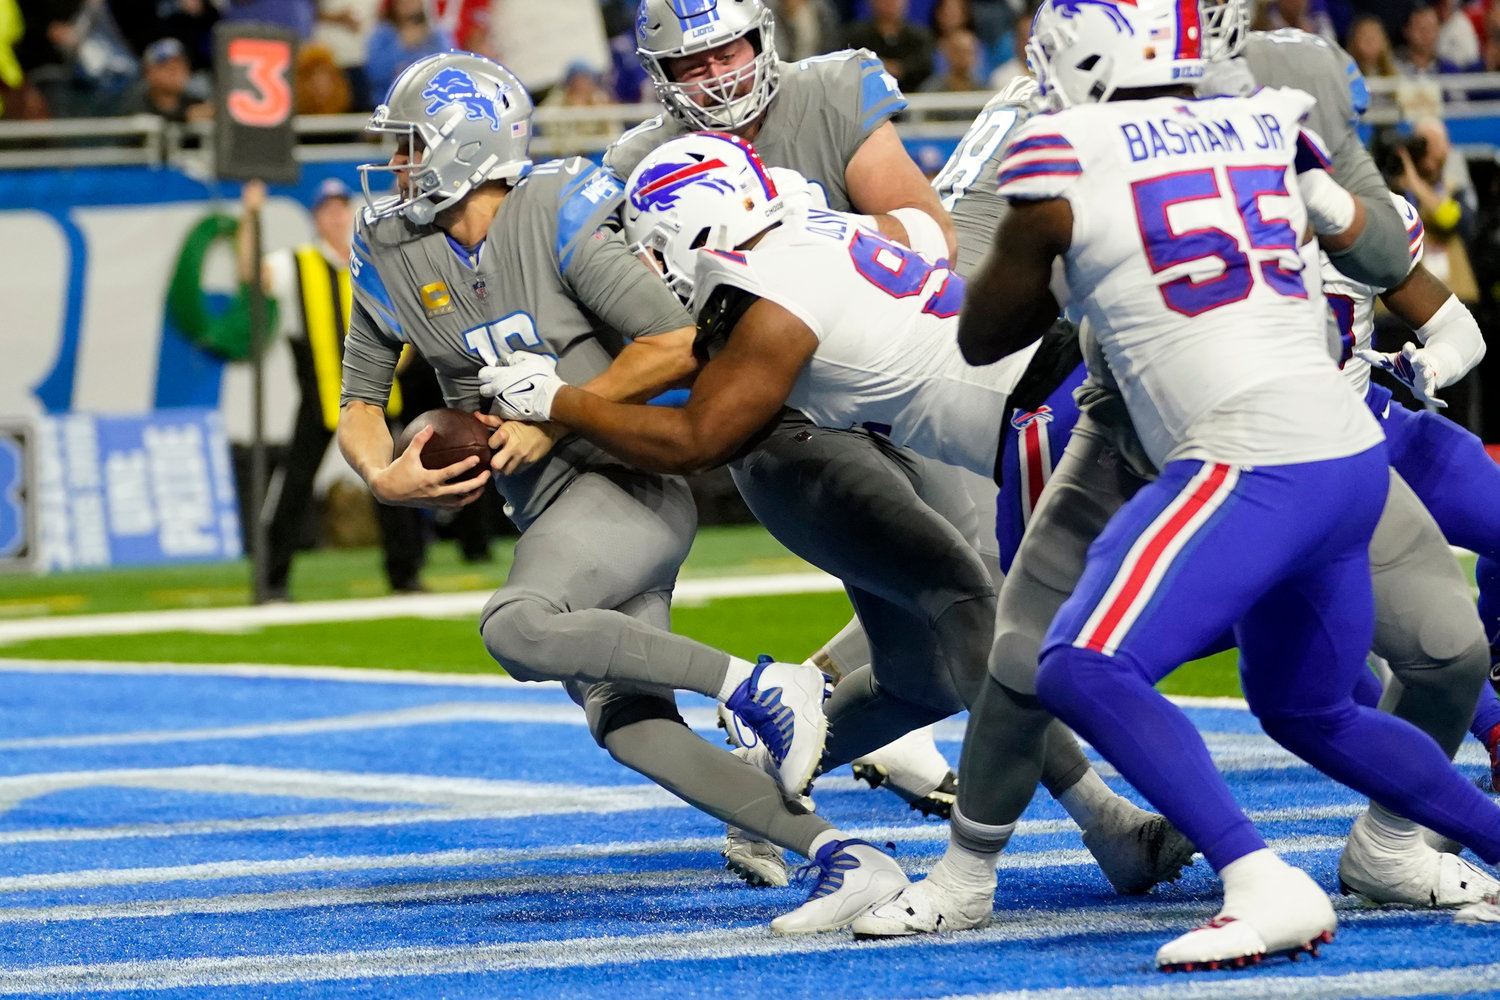 Detroit Lions quarterback Jared Goff (16) is tackled by Buffalo Bills defensive tackle Ed Oliver (91) for a safety during the second half on Thursday afternoon in Detroit. The Bills won 28-25.